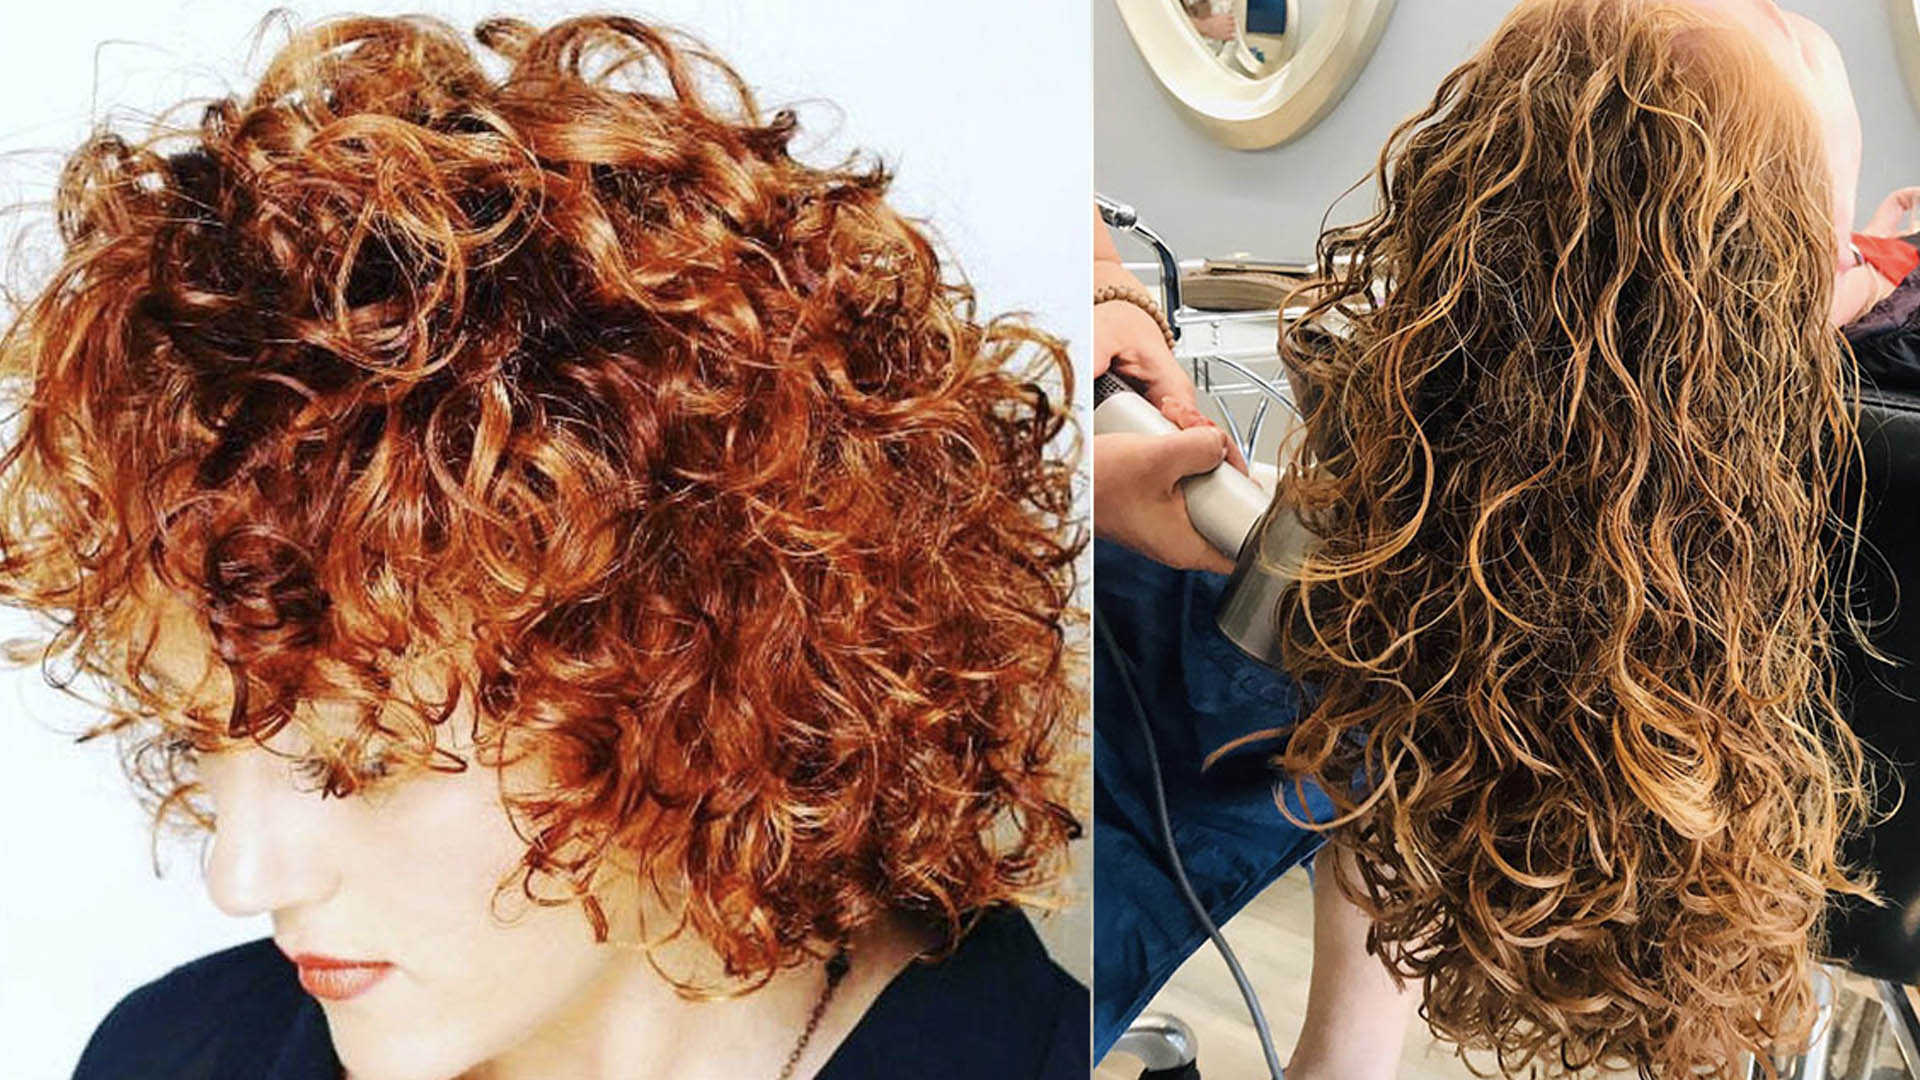 Curly Hair Images